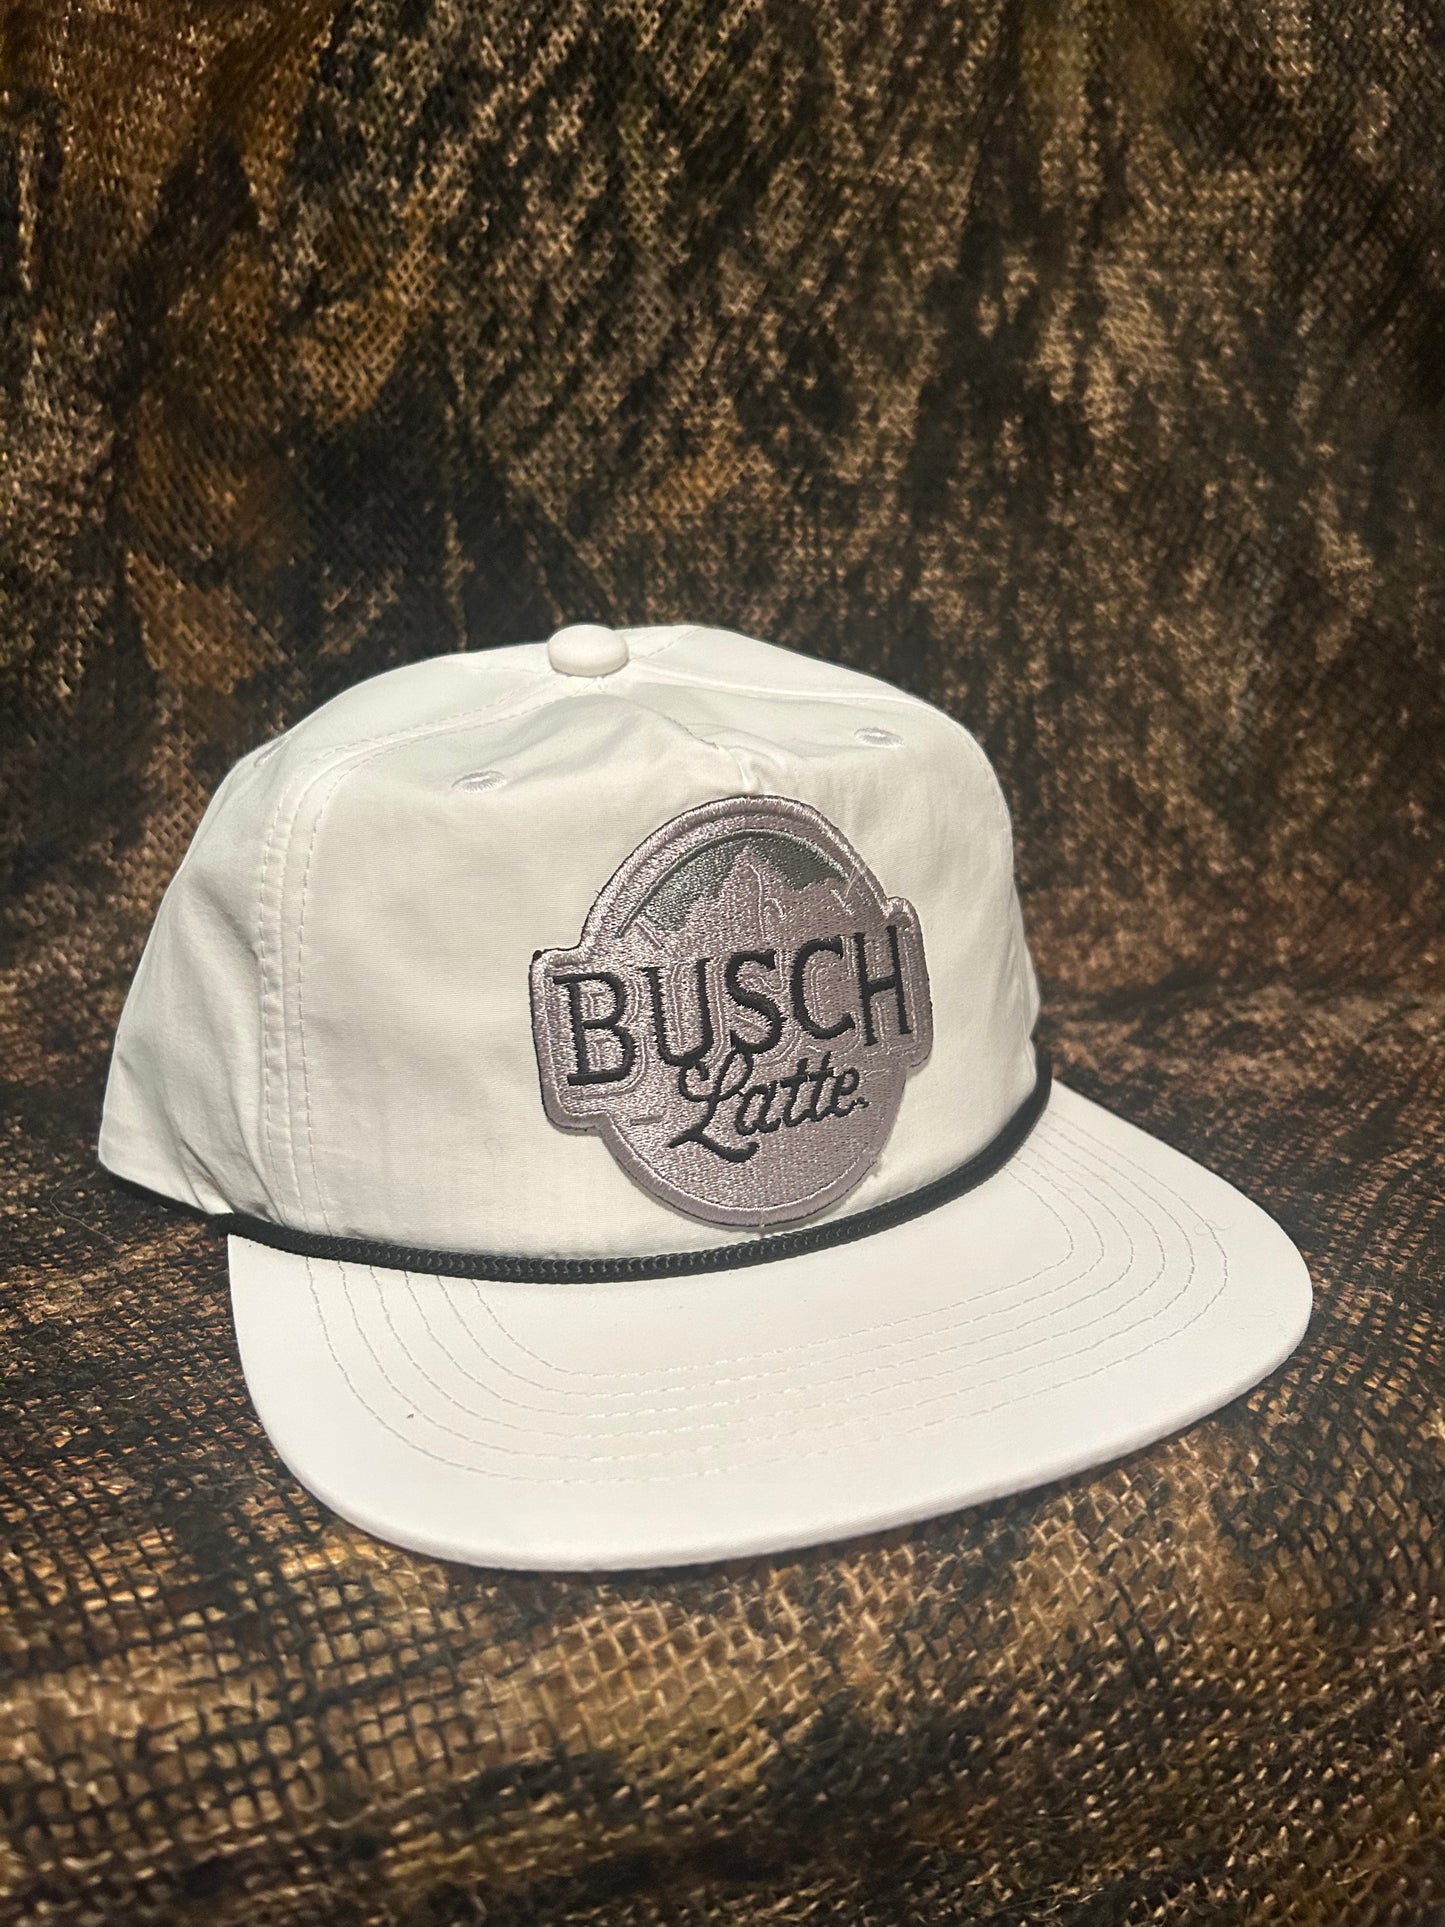 Busch Latte patch on a white rope brim SnapBack hat